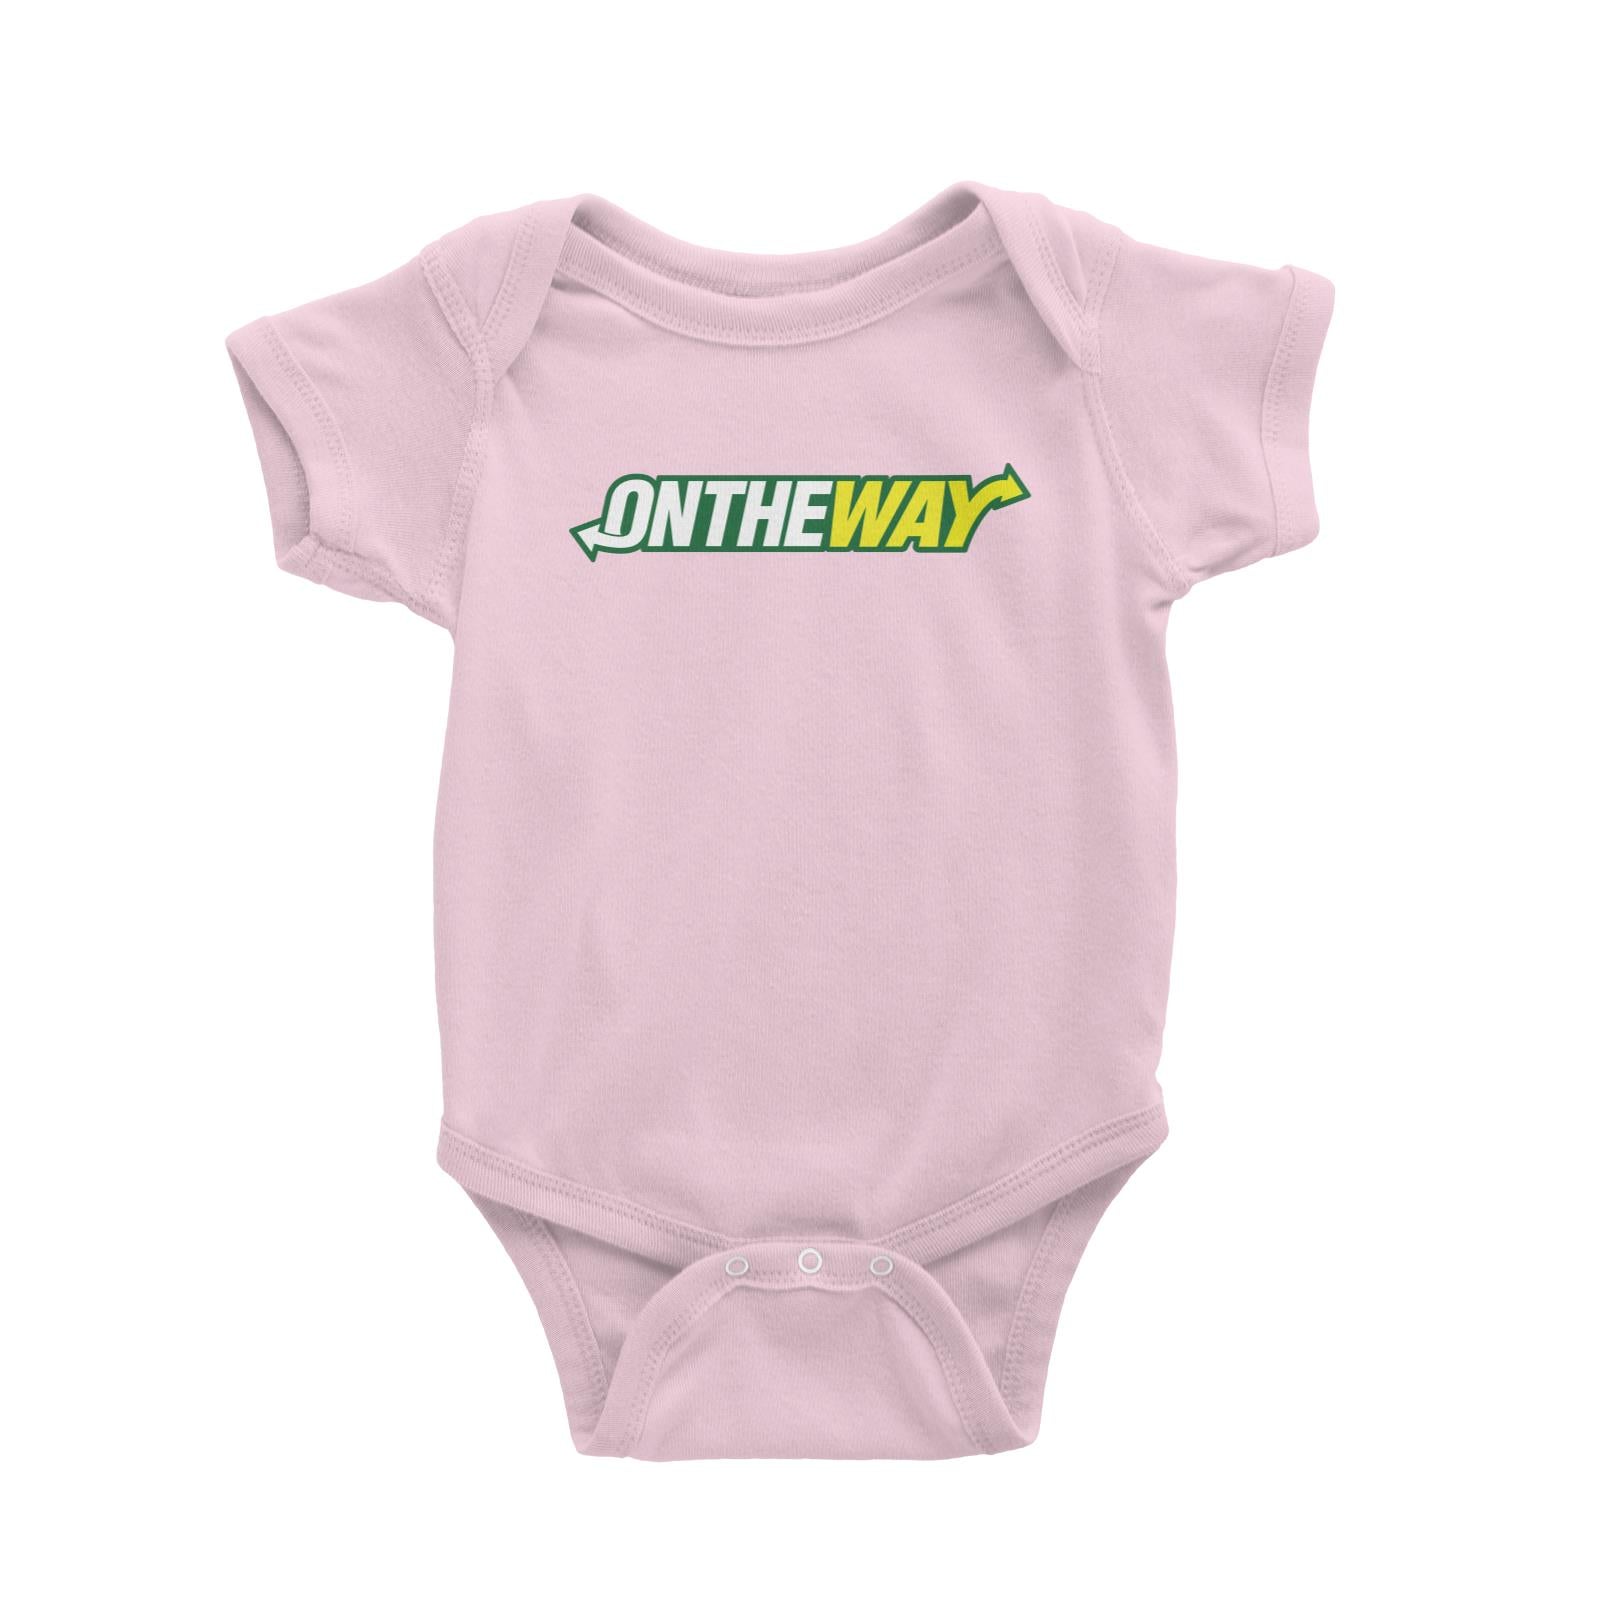 Slang Statement On The Way Baby Romper